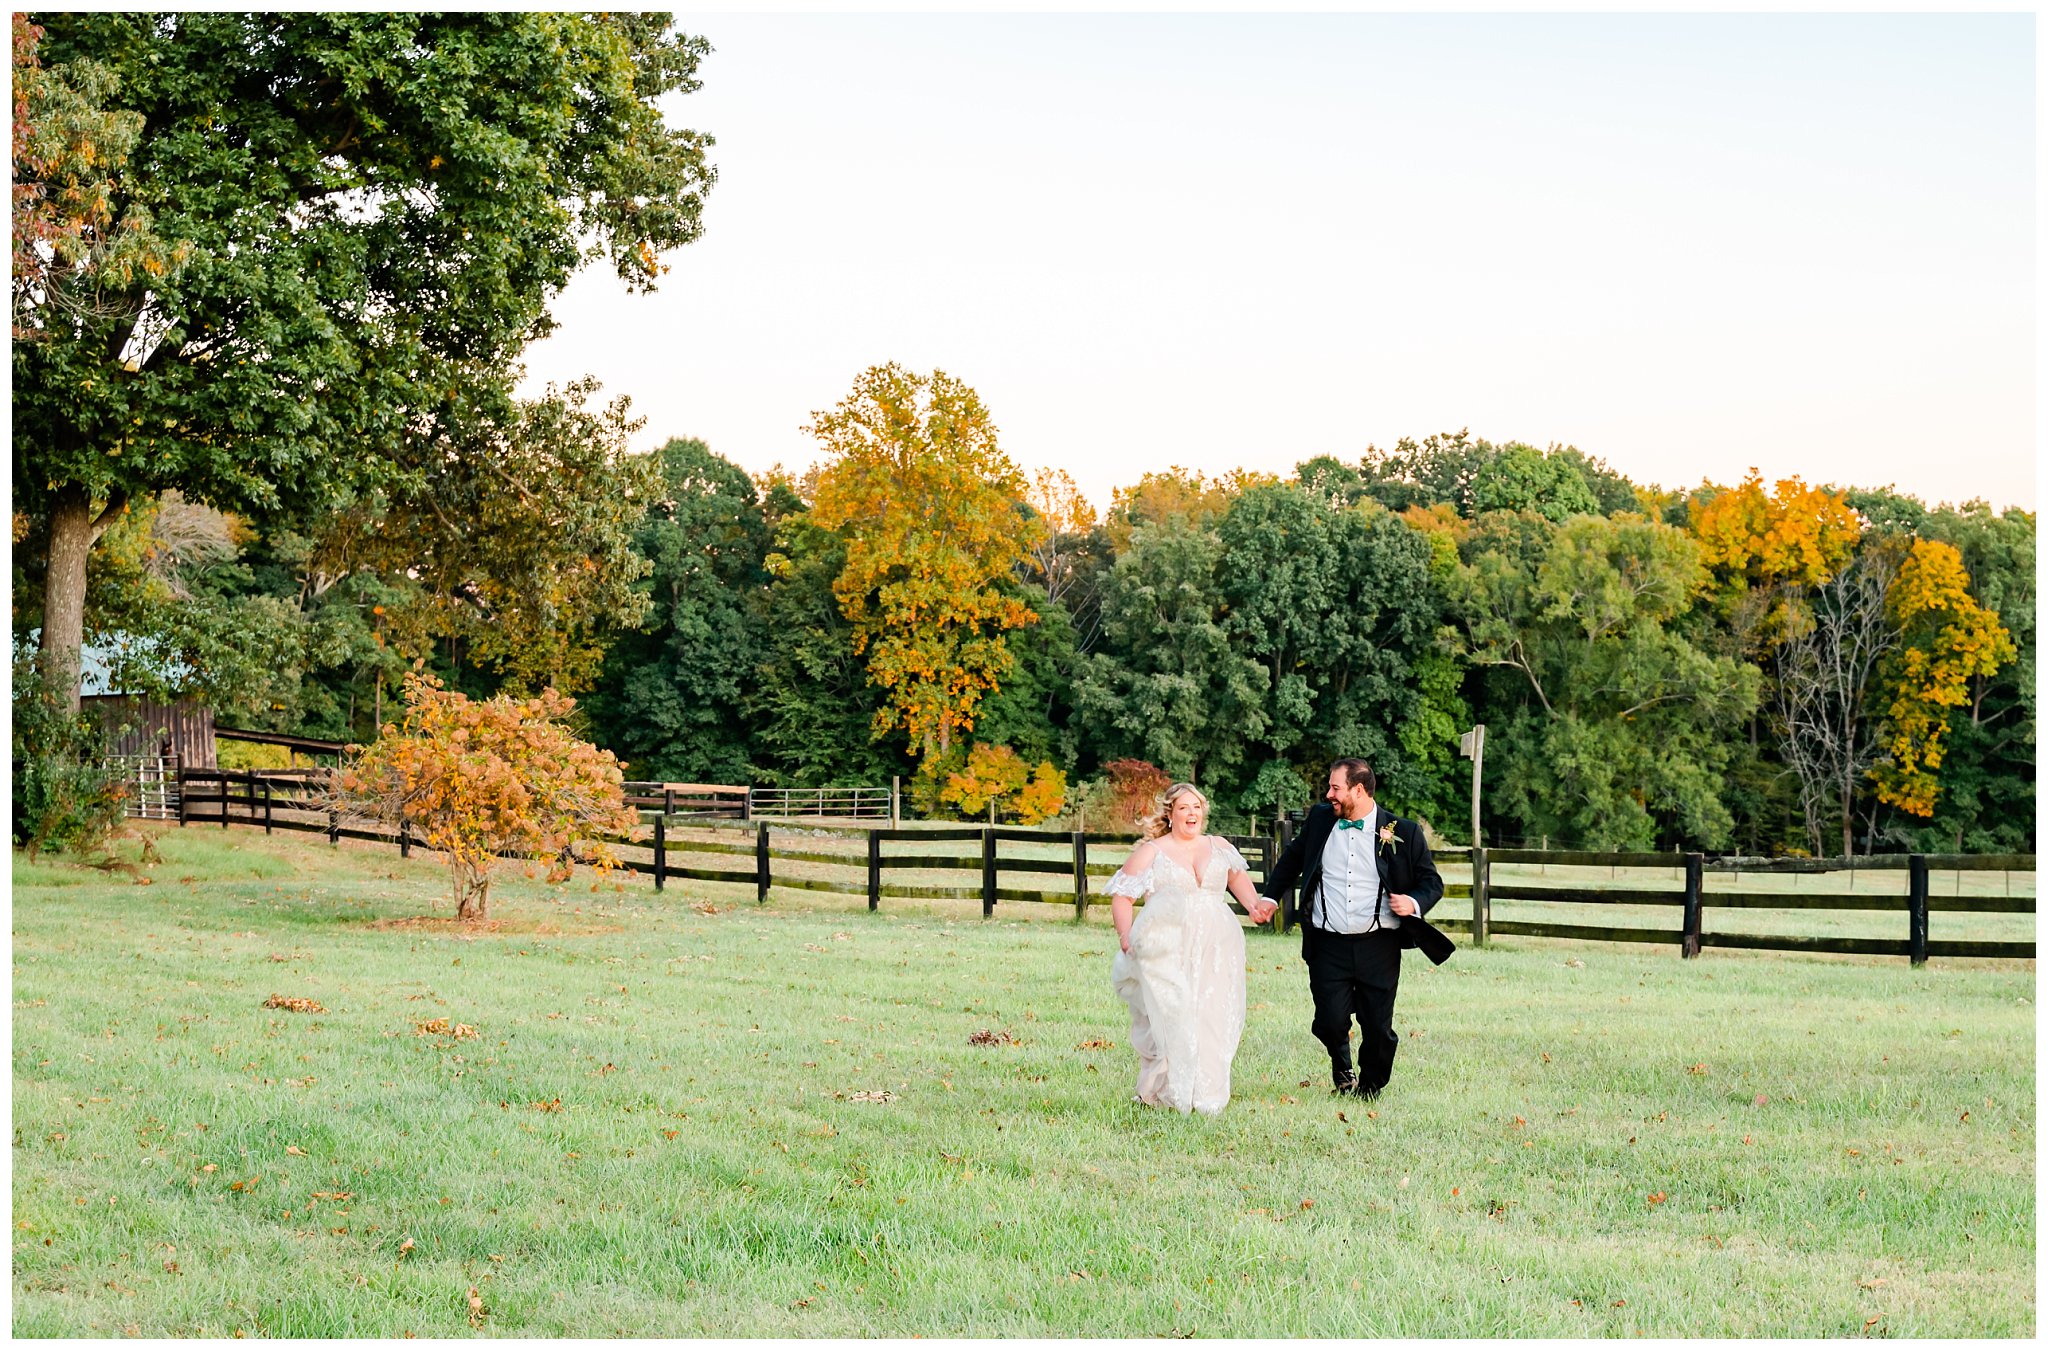 Asheville wedding photographer captures bride and groom photo outdoors for their equestrian farm wedding